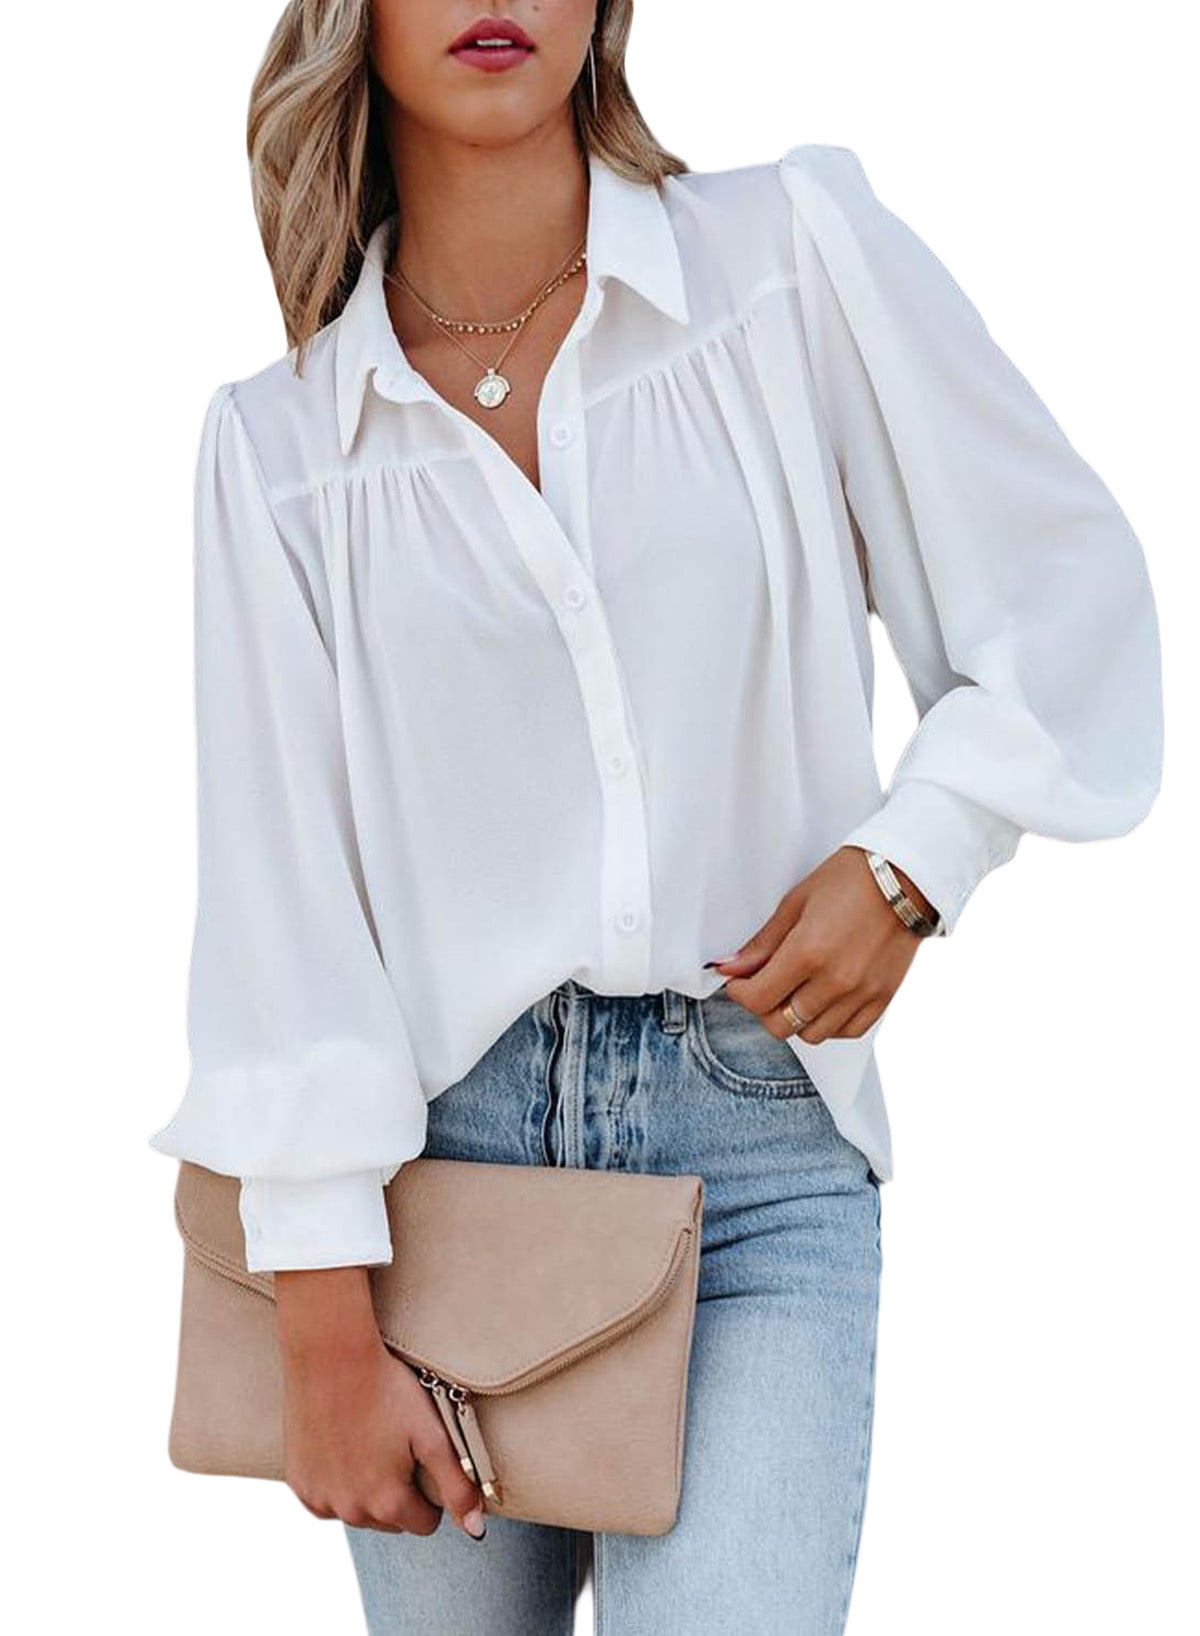 FARYSAYS Long Sleeve White Blouse for Womens Flowy Tops White